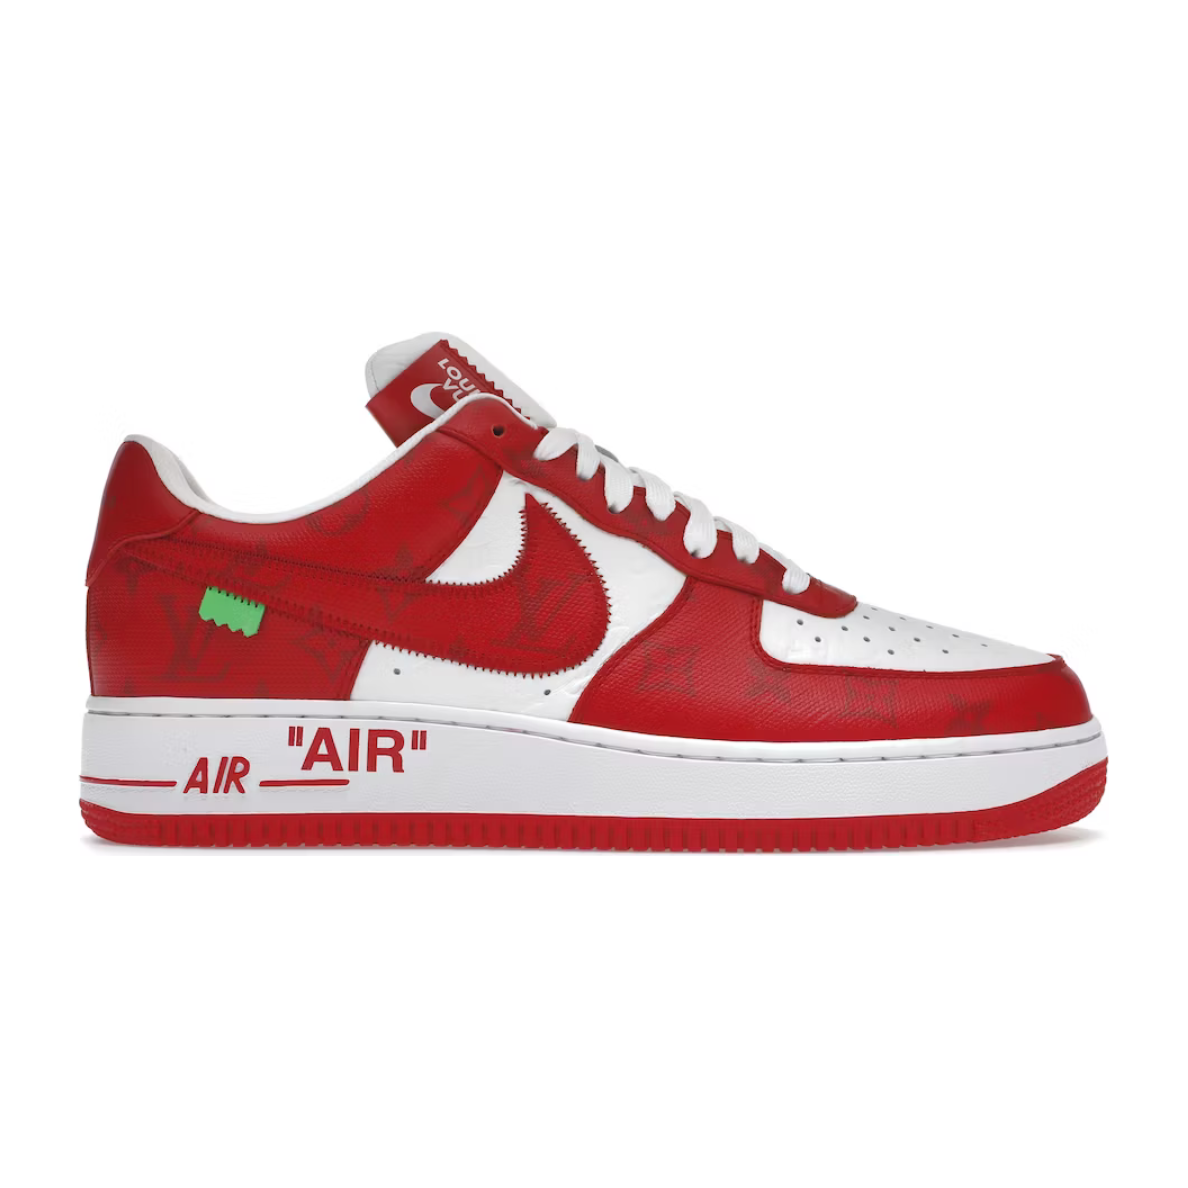 Louis Vuitton Nike Air Force 1 Low By Virgil Abloh White Red from Louis Vuitton